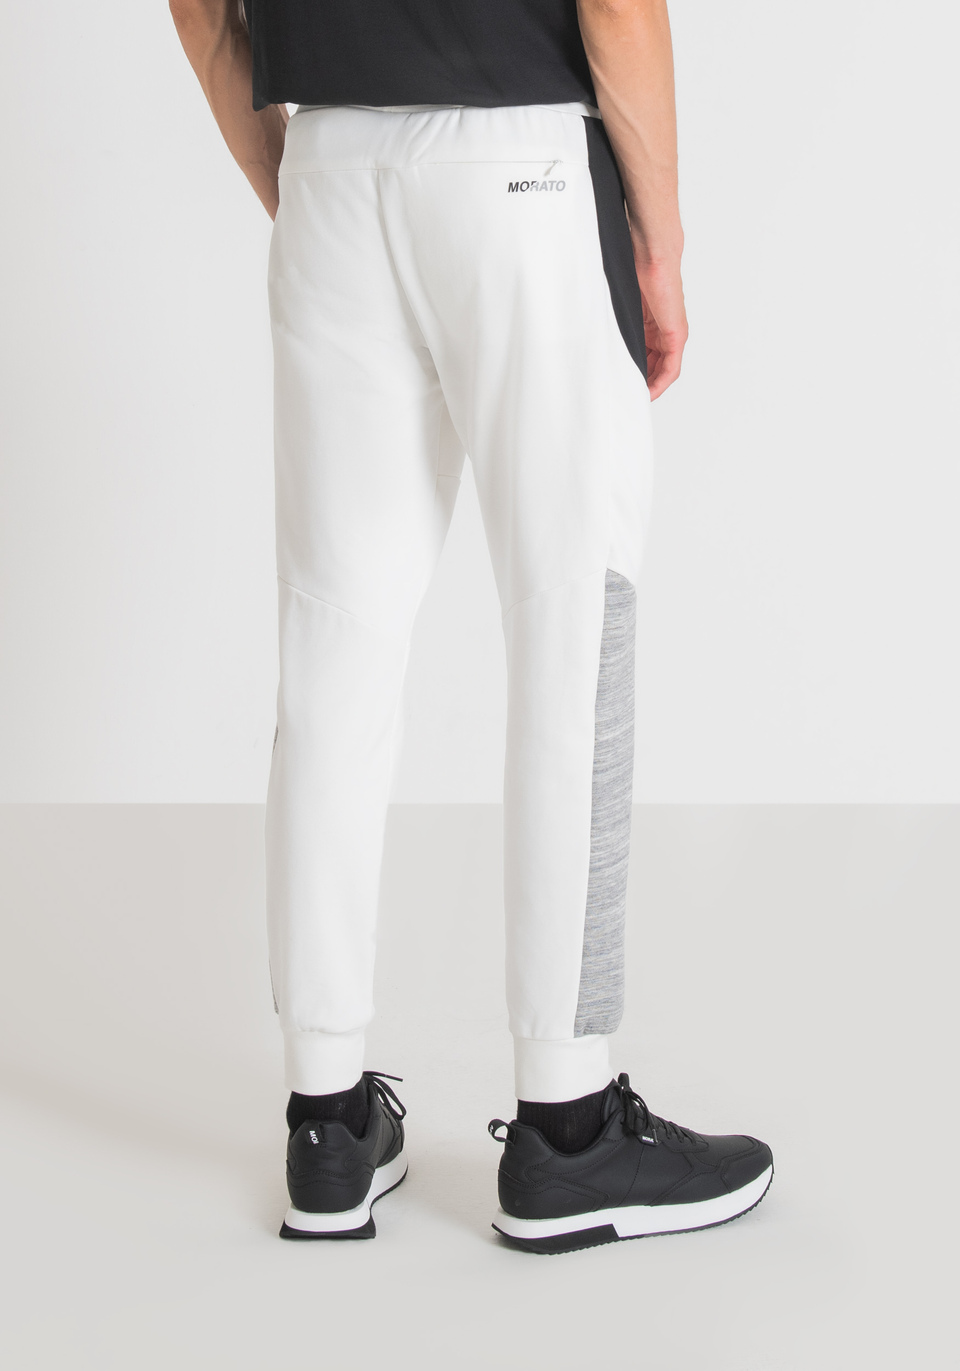 REGULAR FIT SWEATPANTS IN STRETCH COTTON BLEND WITH CONTRASTING SIDE BANDS - Antony Morato Online Shop